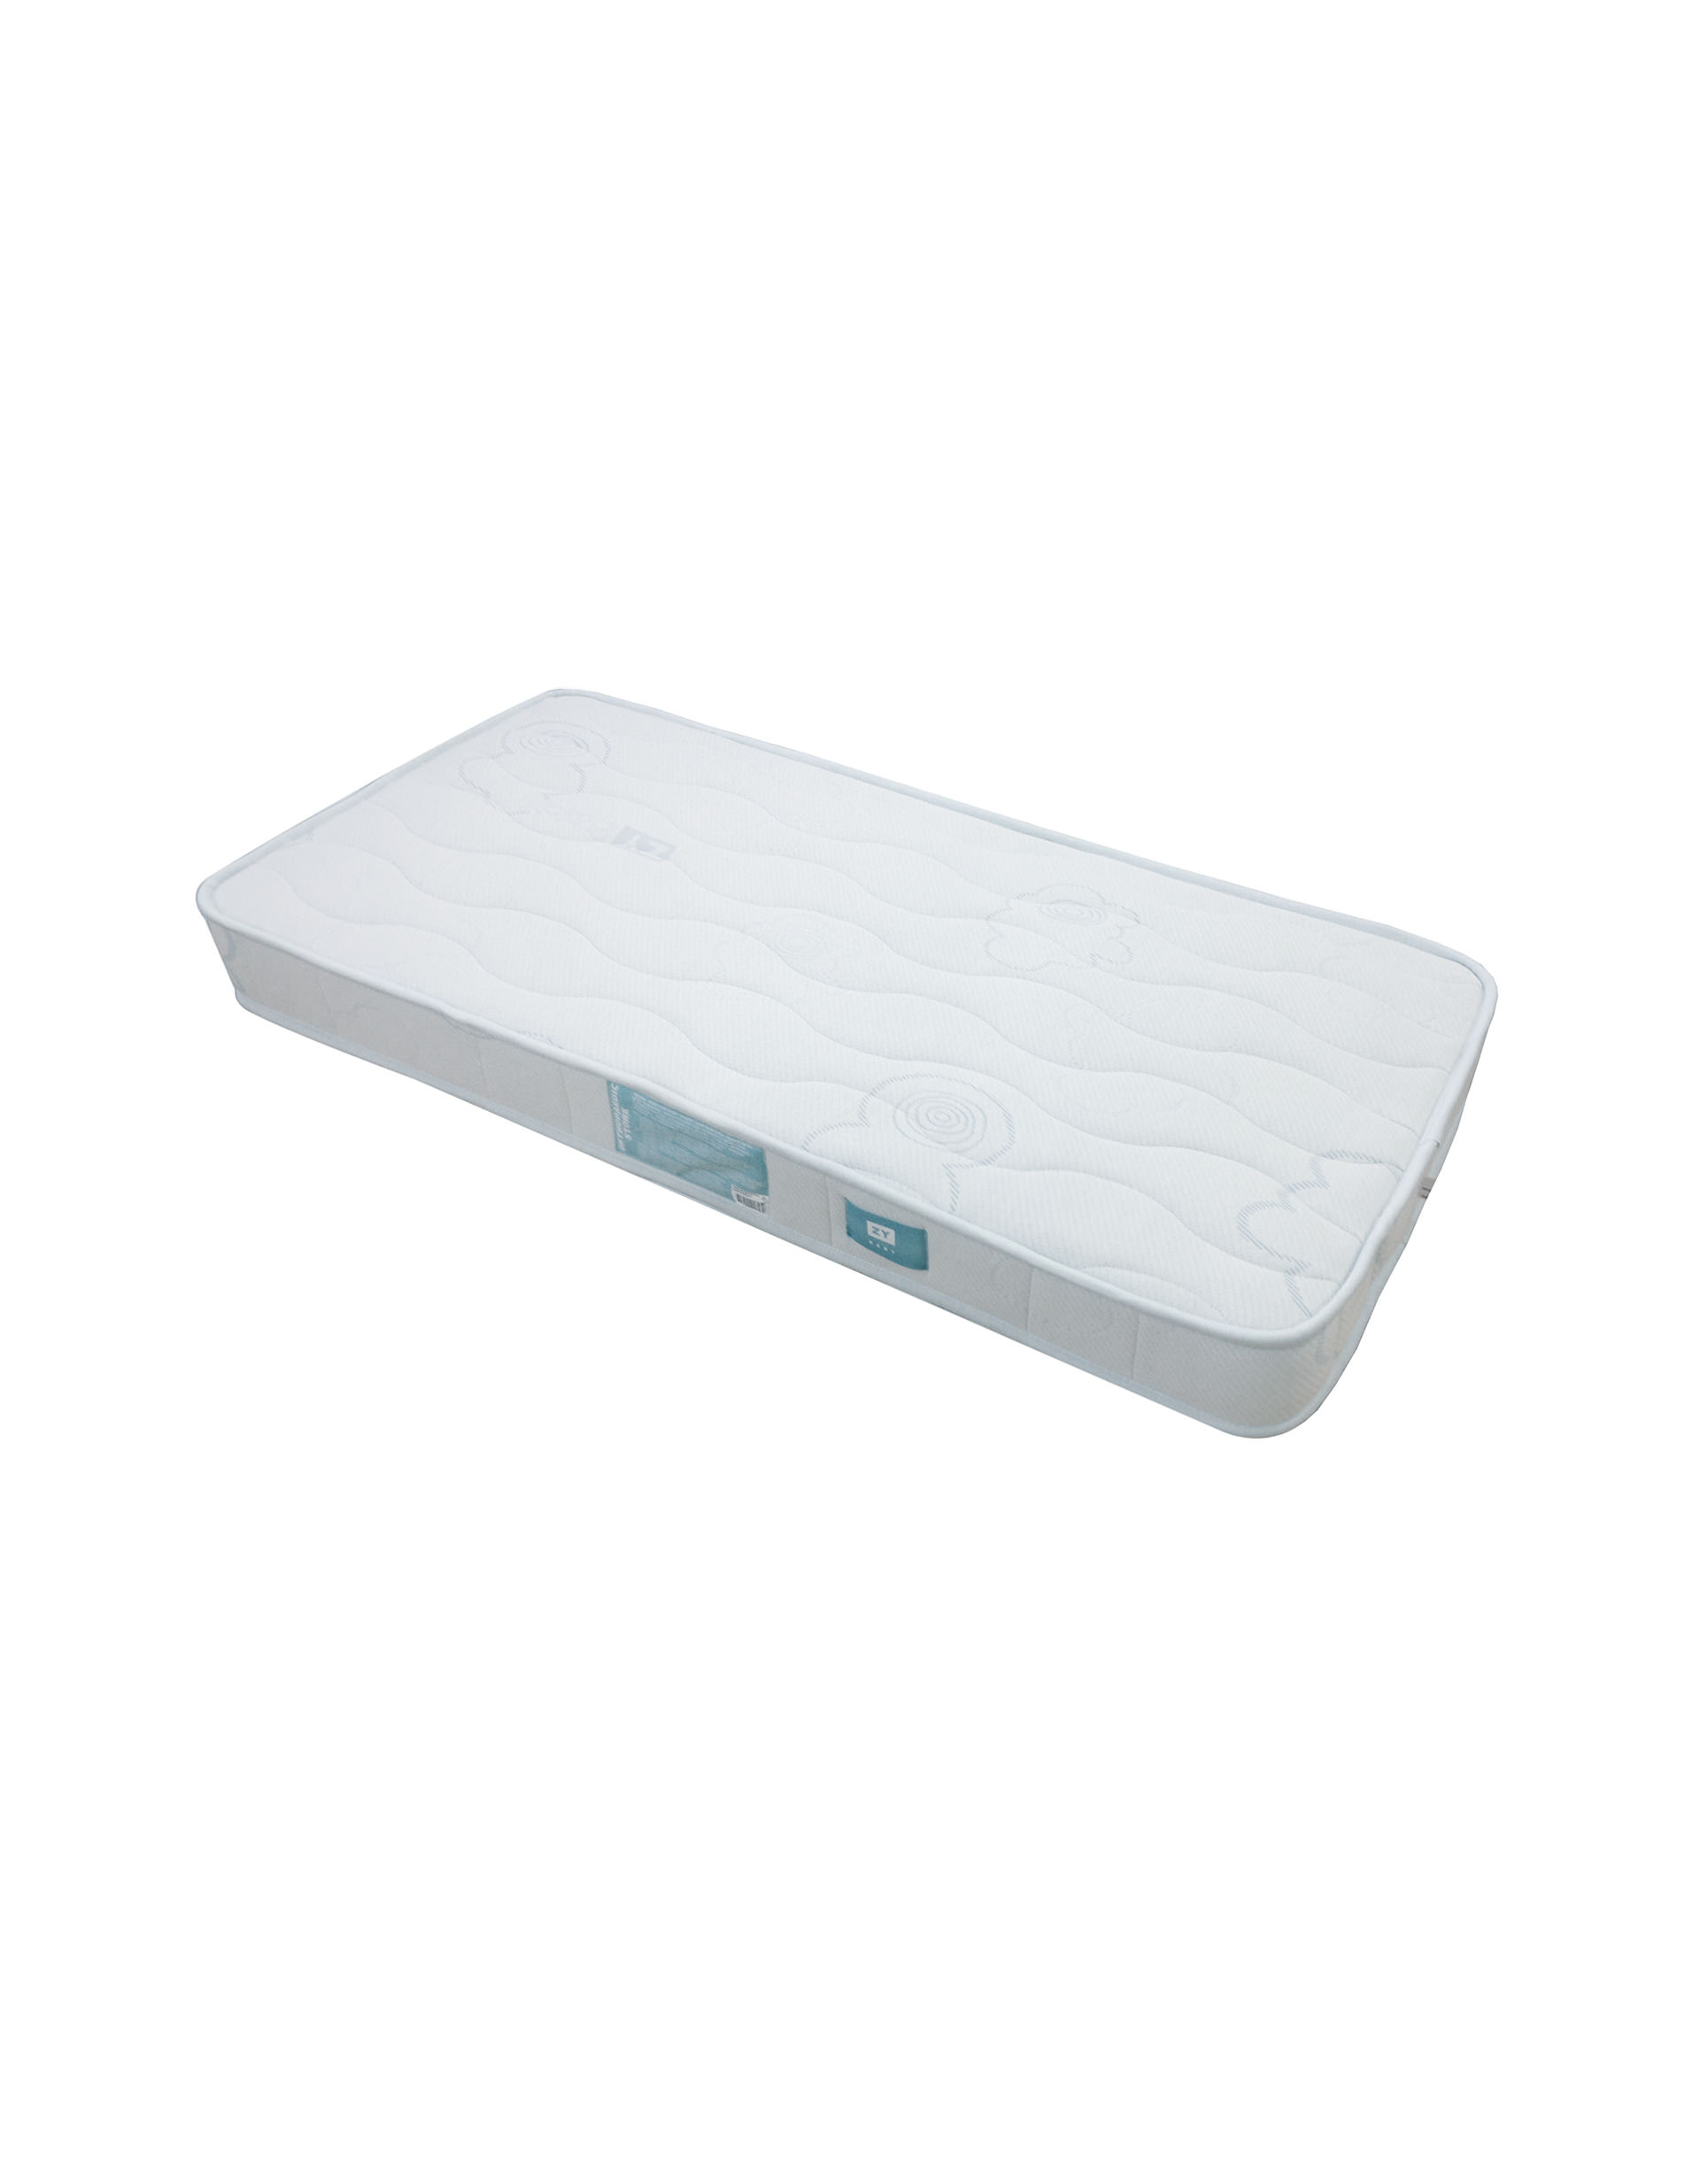 Orthopedic Mattress for 120x60 Cot by ZY BABY